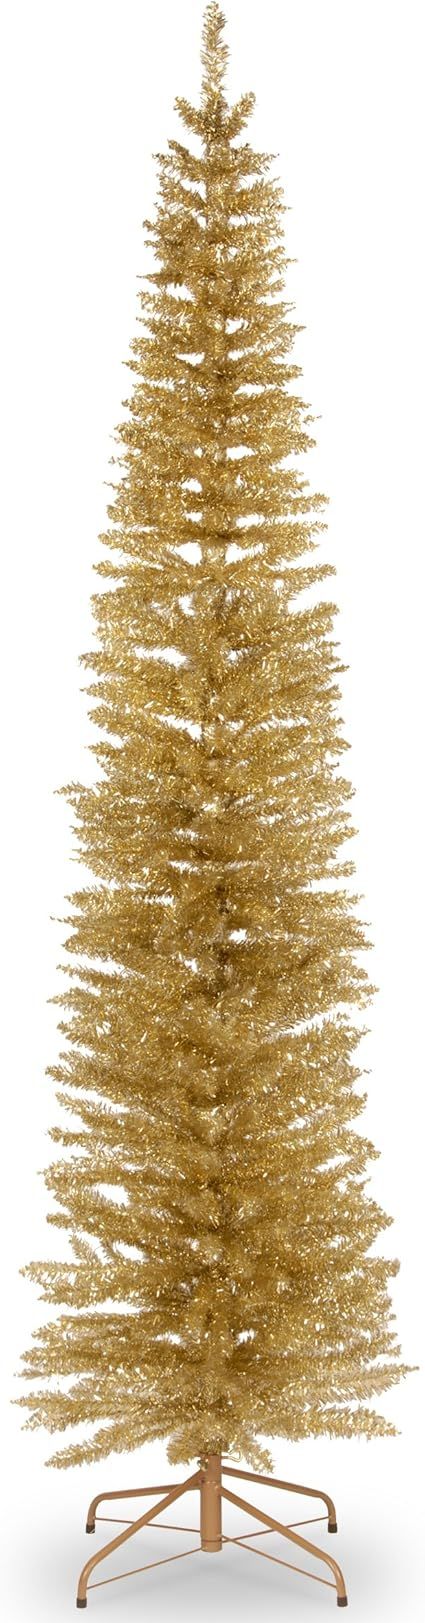 National Tree Company Artificial Christmas Tree, Champagne Gold Tinsel, Includes Stand, 7 feet | Amazon (US)